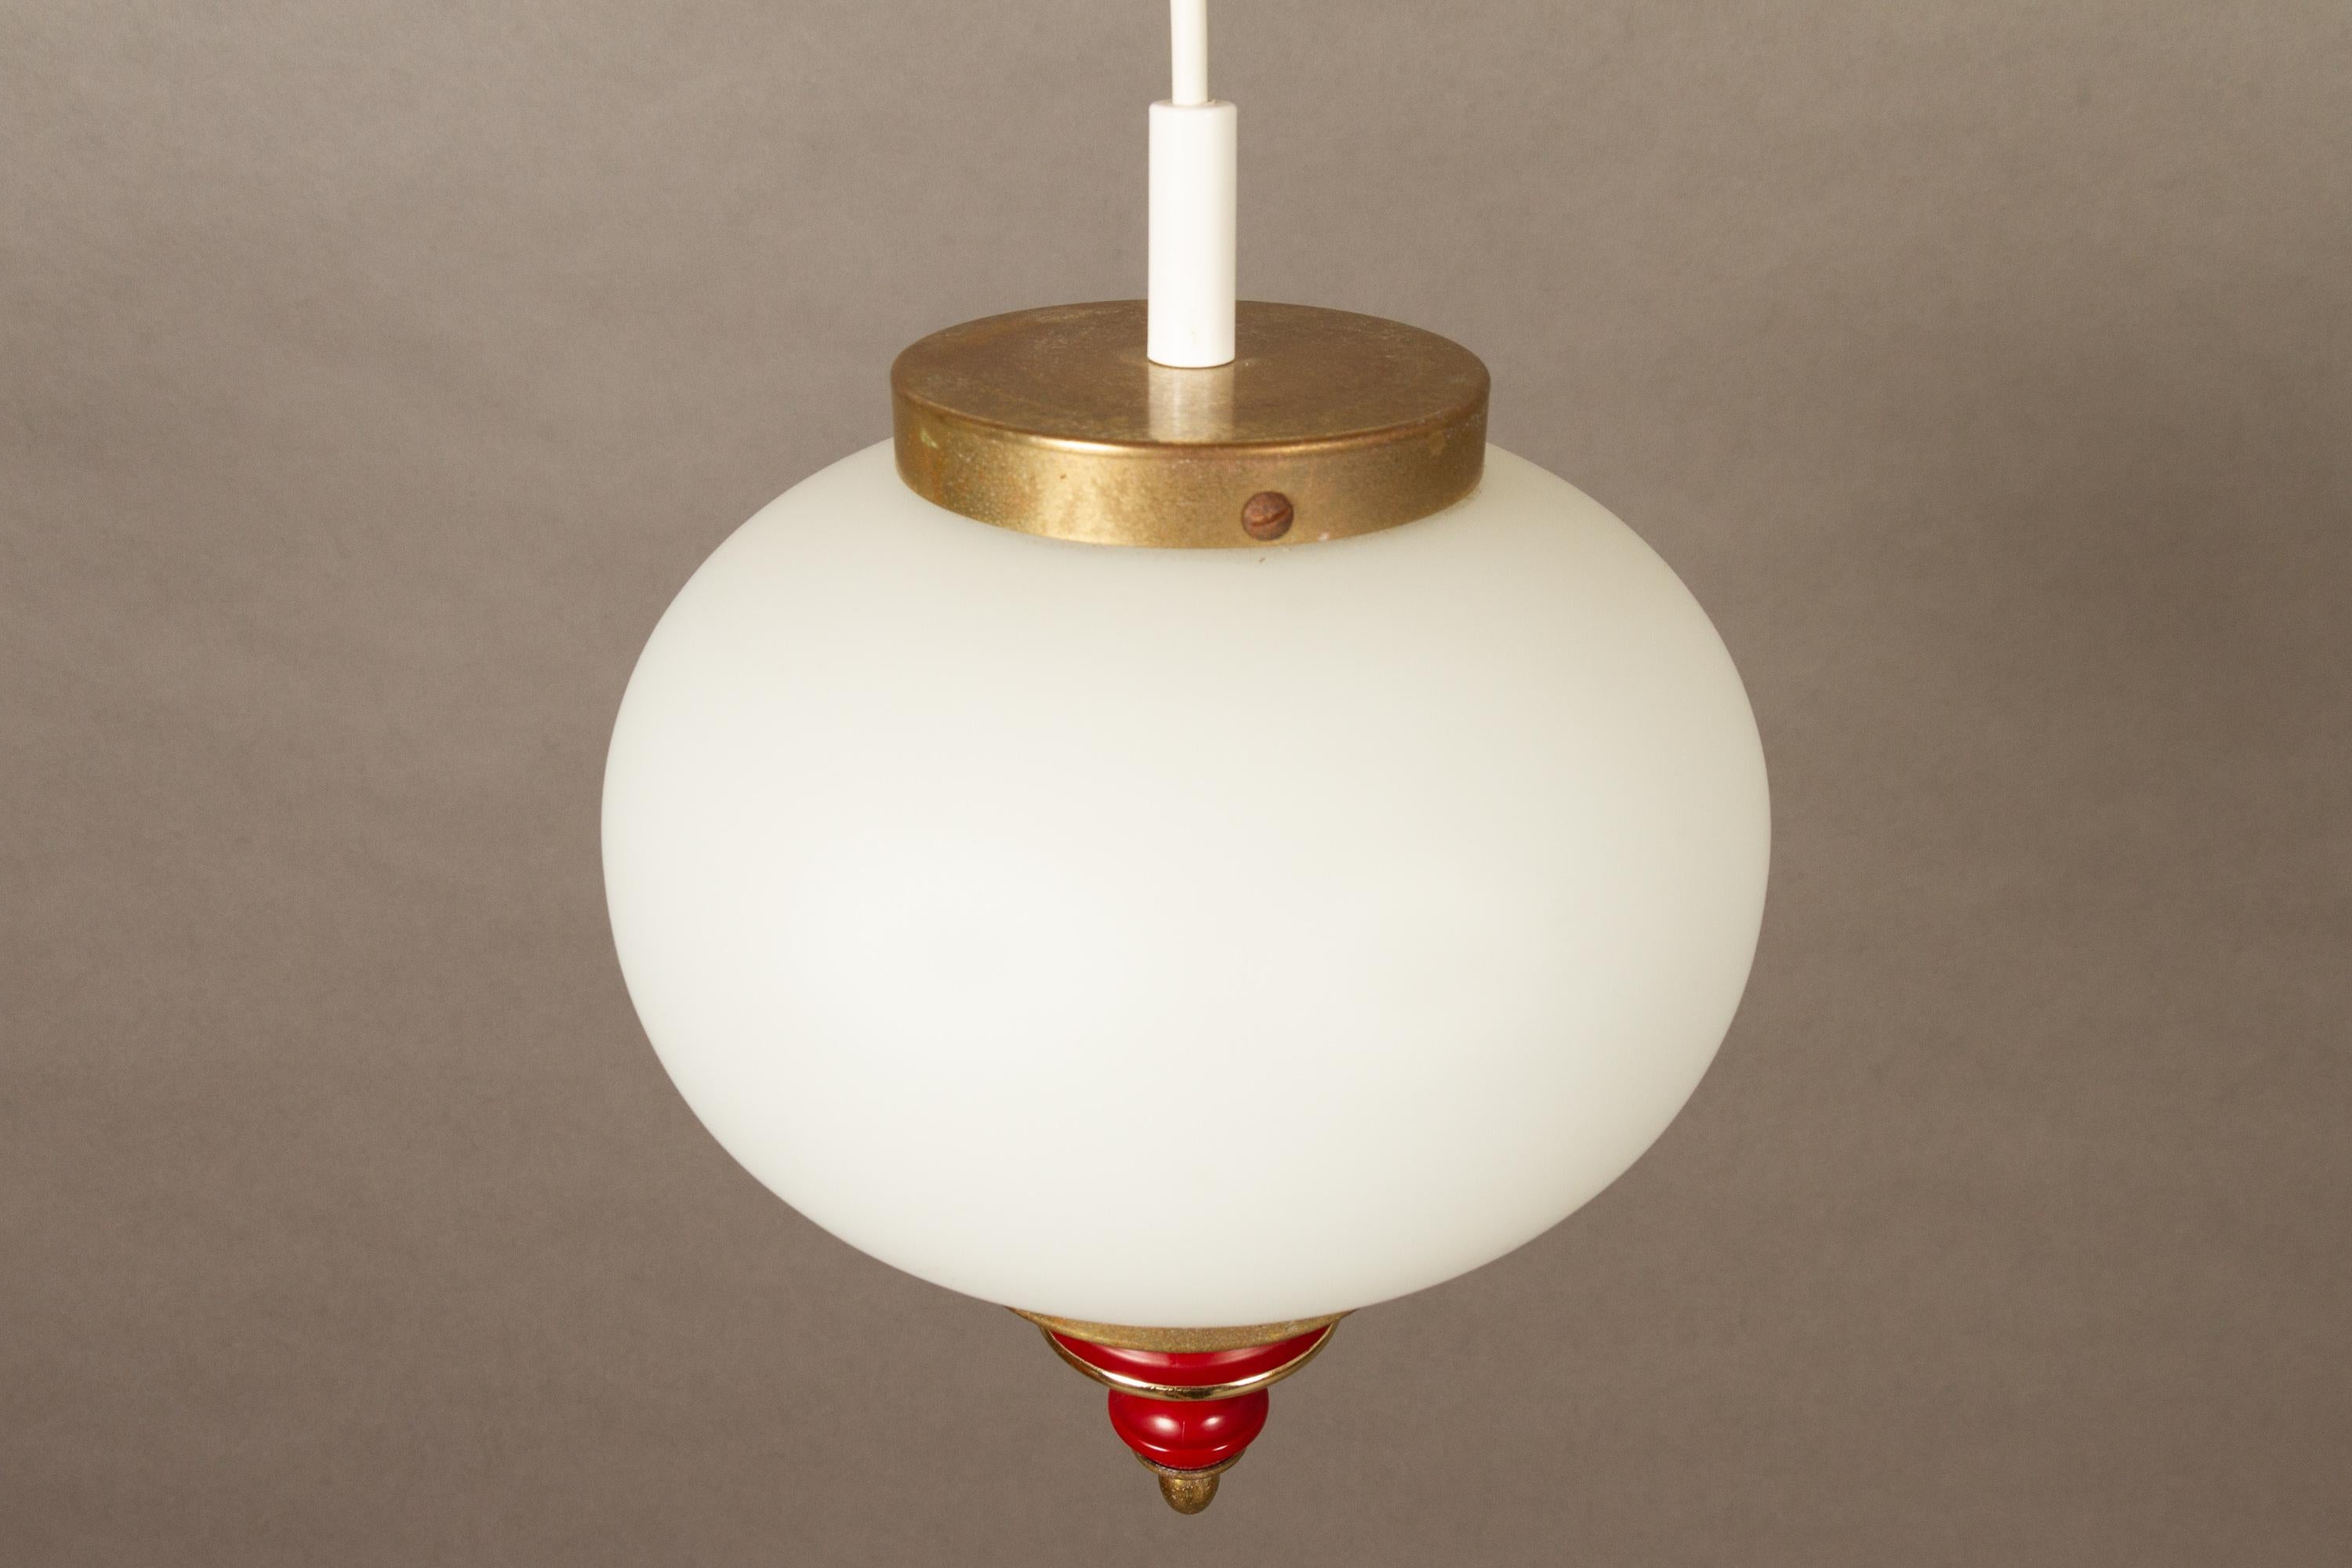 Vintage Danish opal ceiling lamp, 1950s.
Round opal-white glass with brass top and decorative brass and red lacquer spinke in the bottom. Emits a soft light.
Good vintage condition. Glass has no cracks.